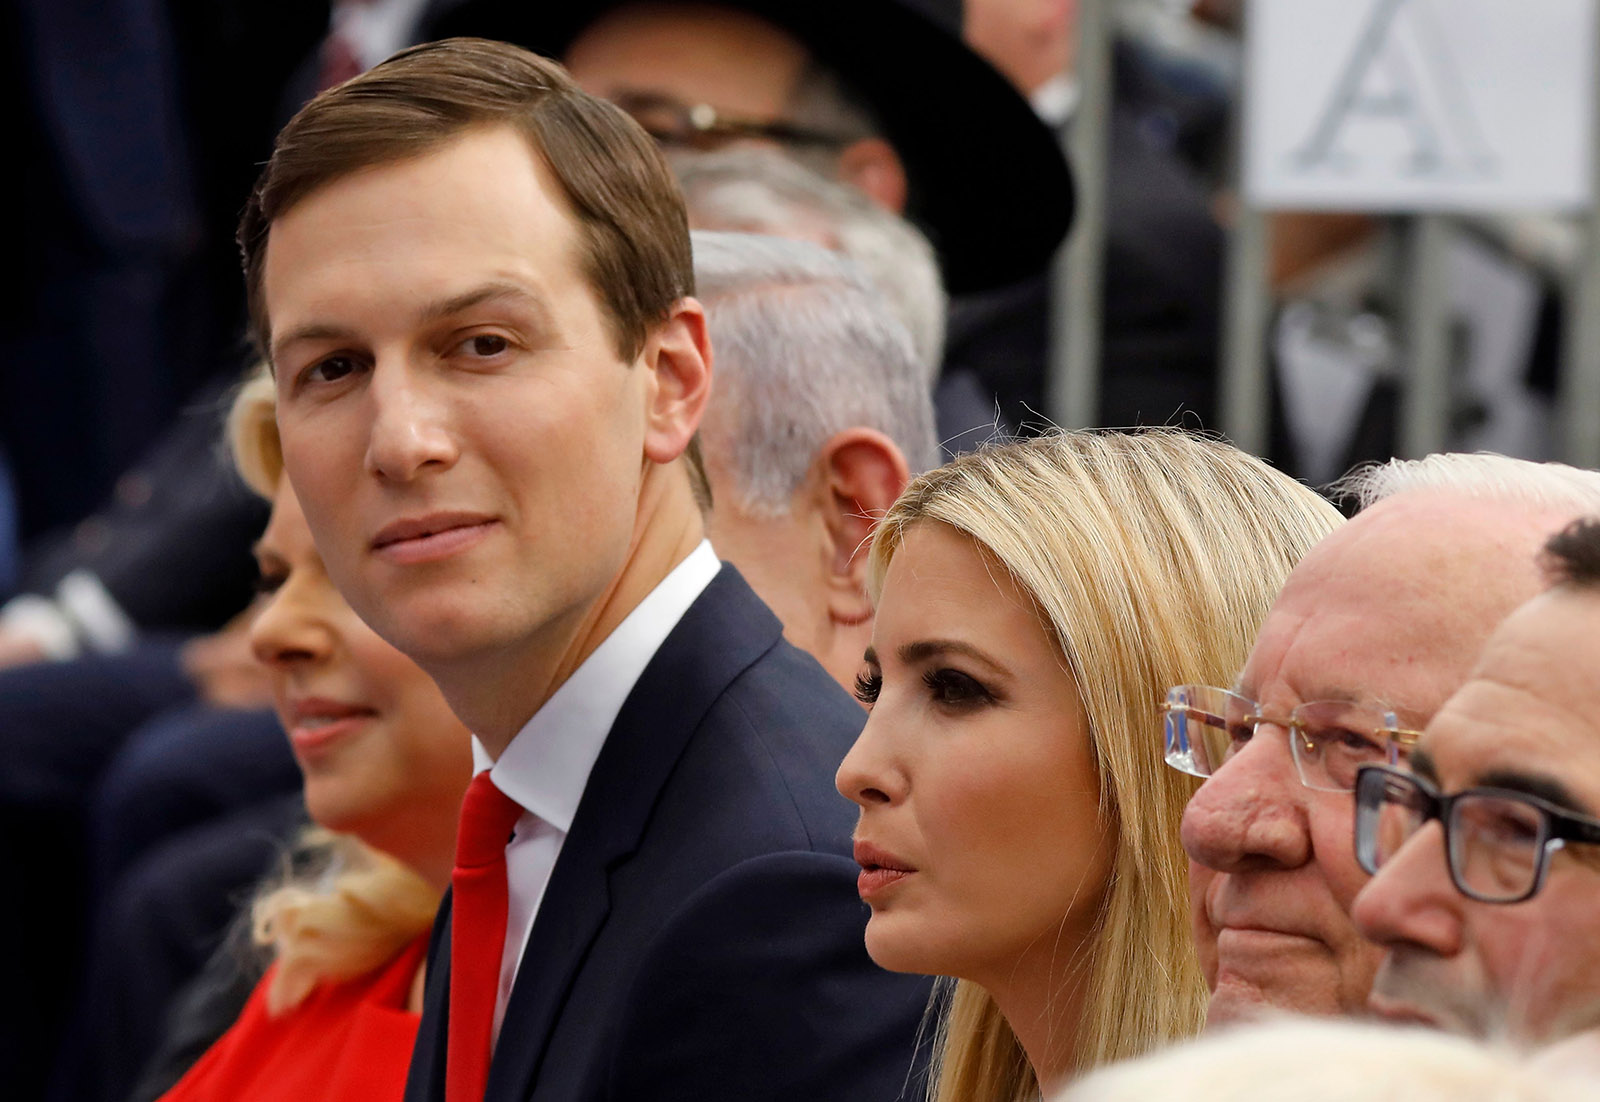 Senior White House Adviser Jared Kushner attending the ceremonial opening of the US embassy in Jerusalem, flanked on his left by his wife, Ivanka Trump, and on his right by Israeli Prime Minister Benjamin Netanyahu, Israel, May 14, 2018